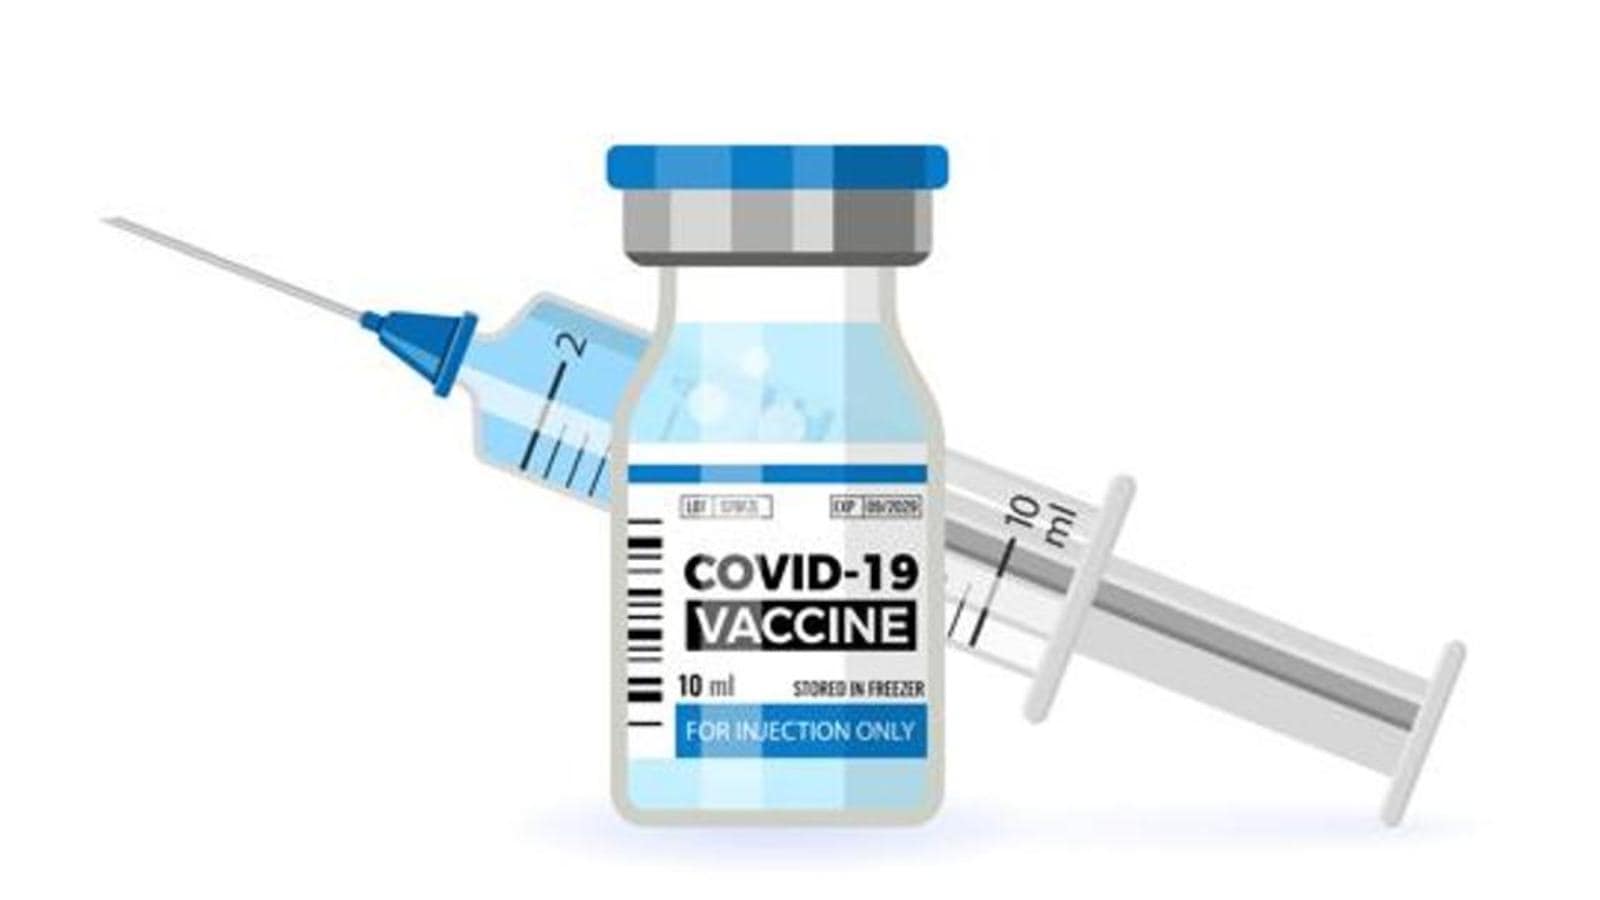 Health ministry buys 300 mn doses of Biological-E’s Covid vaccine in advance